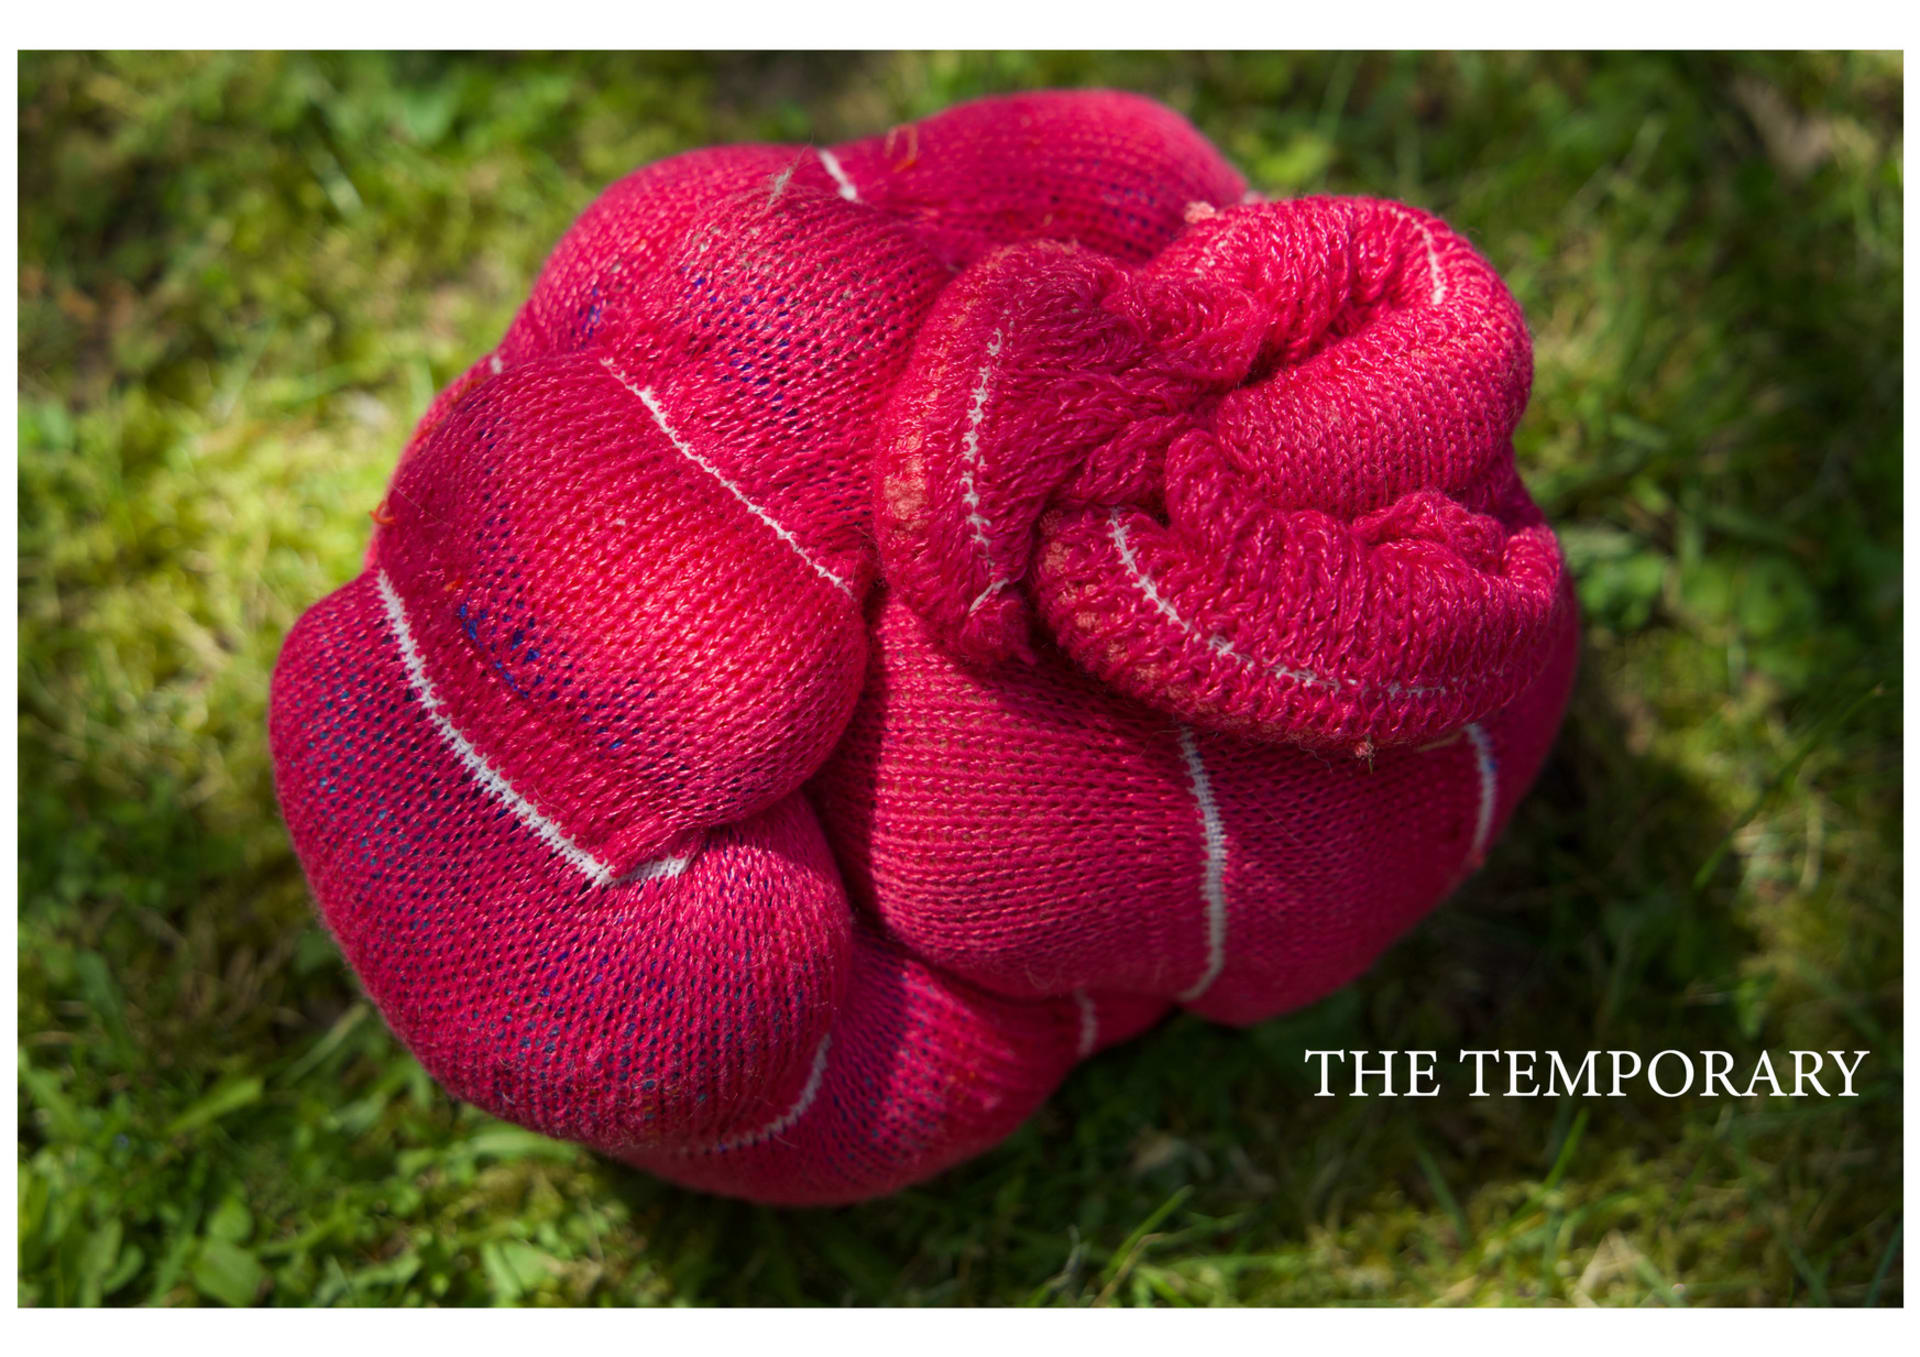 A coil of fuchsia pink knitting with white elastic stripes. Placed on some green grass. The text to the side reads The Temporary